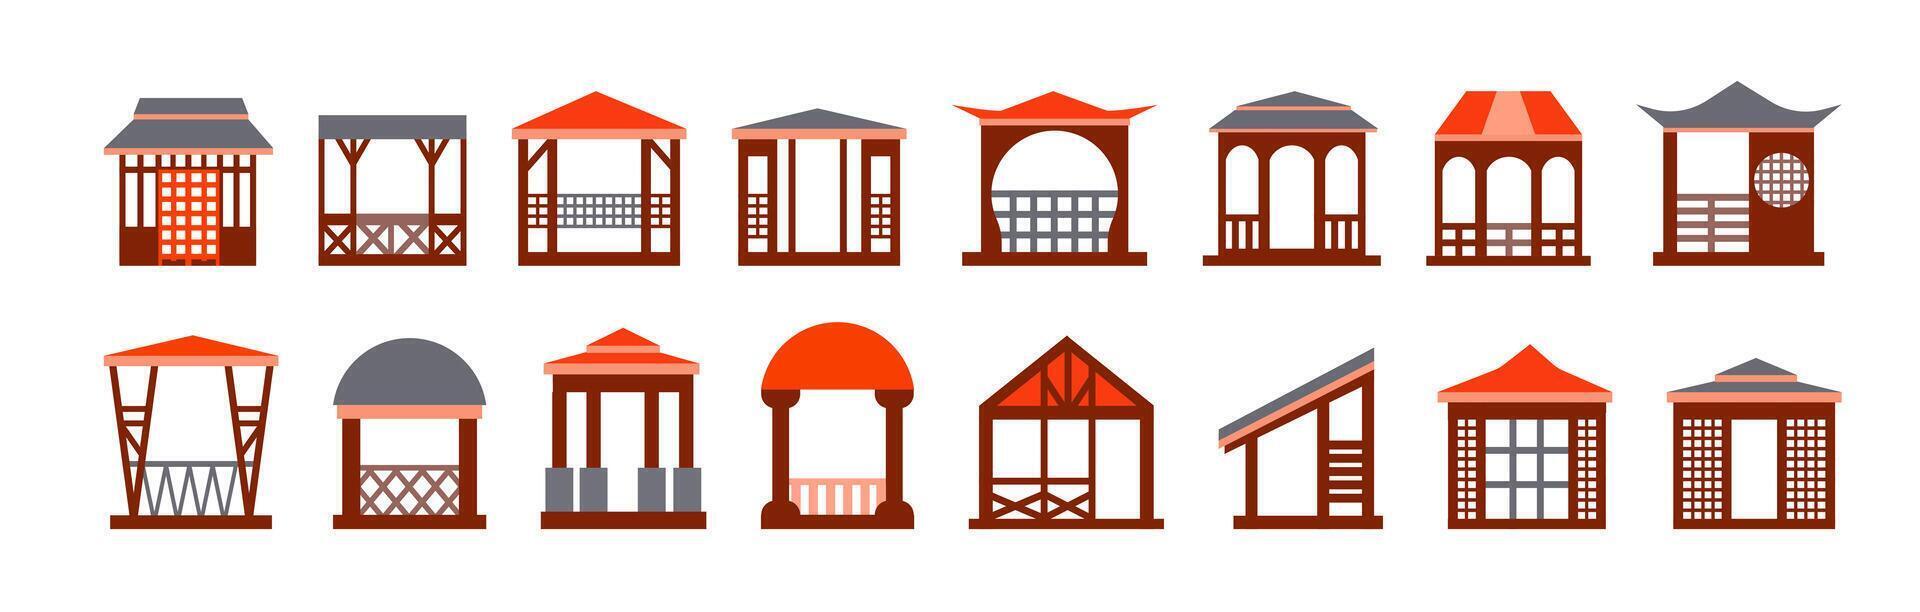 set of options for gazebos for Japanese and Chinese gardens. Collection icons in flat cartoon style for landscape design and construction isolated on white background vector